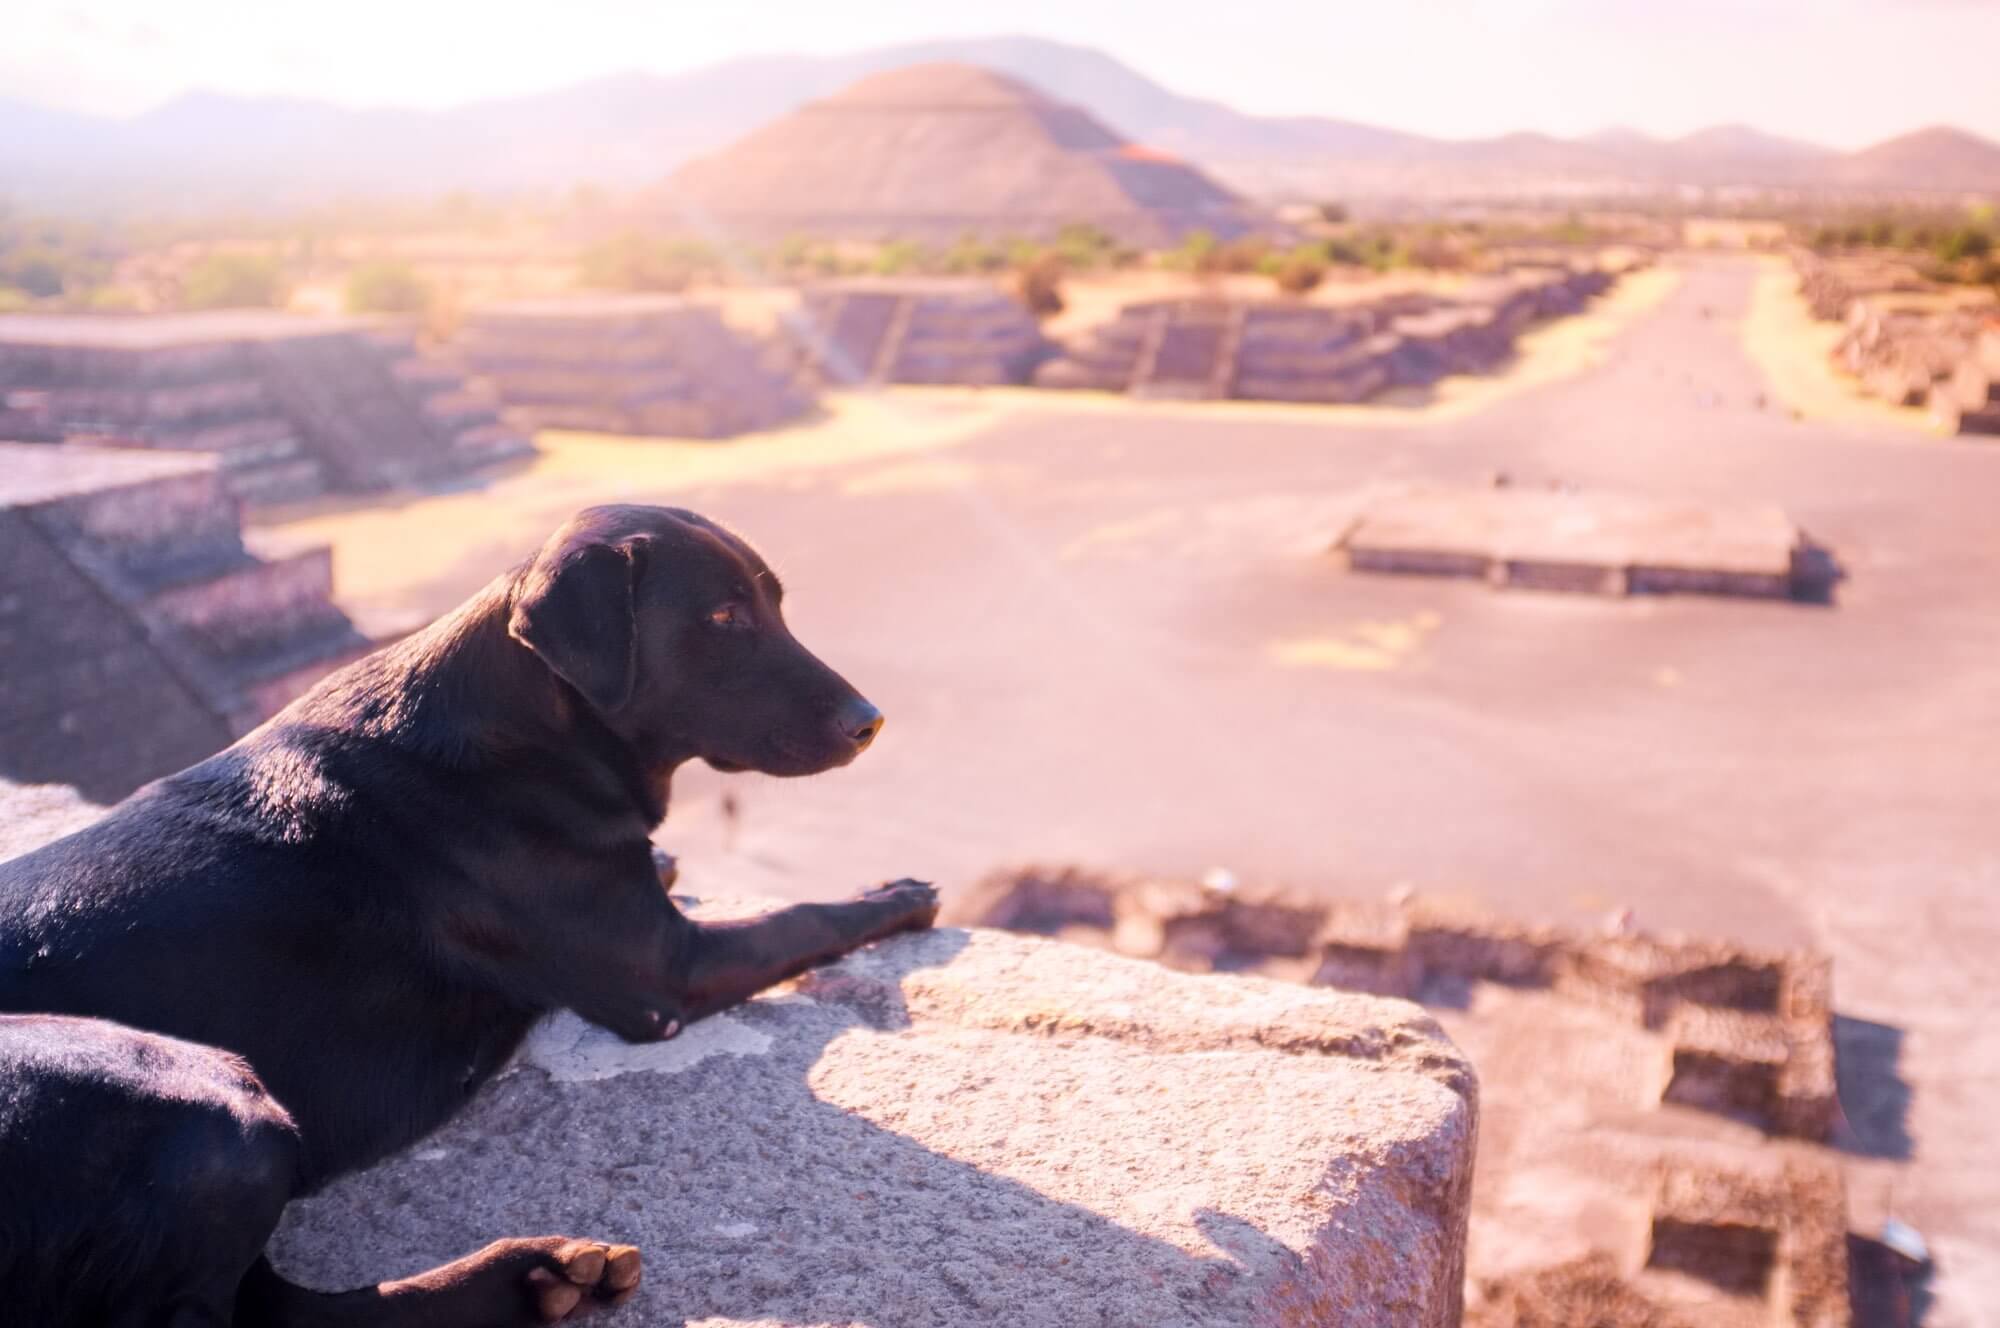 This friendly dog adopted us for our day at Teotihuacan, climbing the Moon Pyramid with us